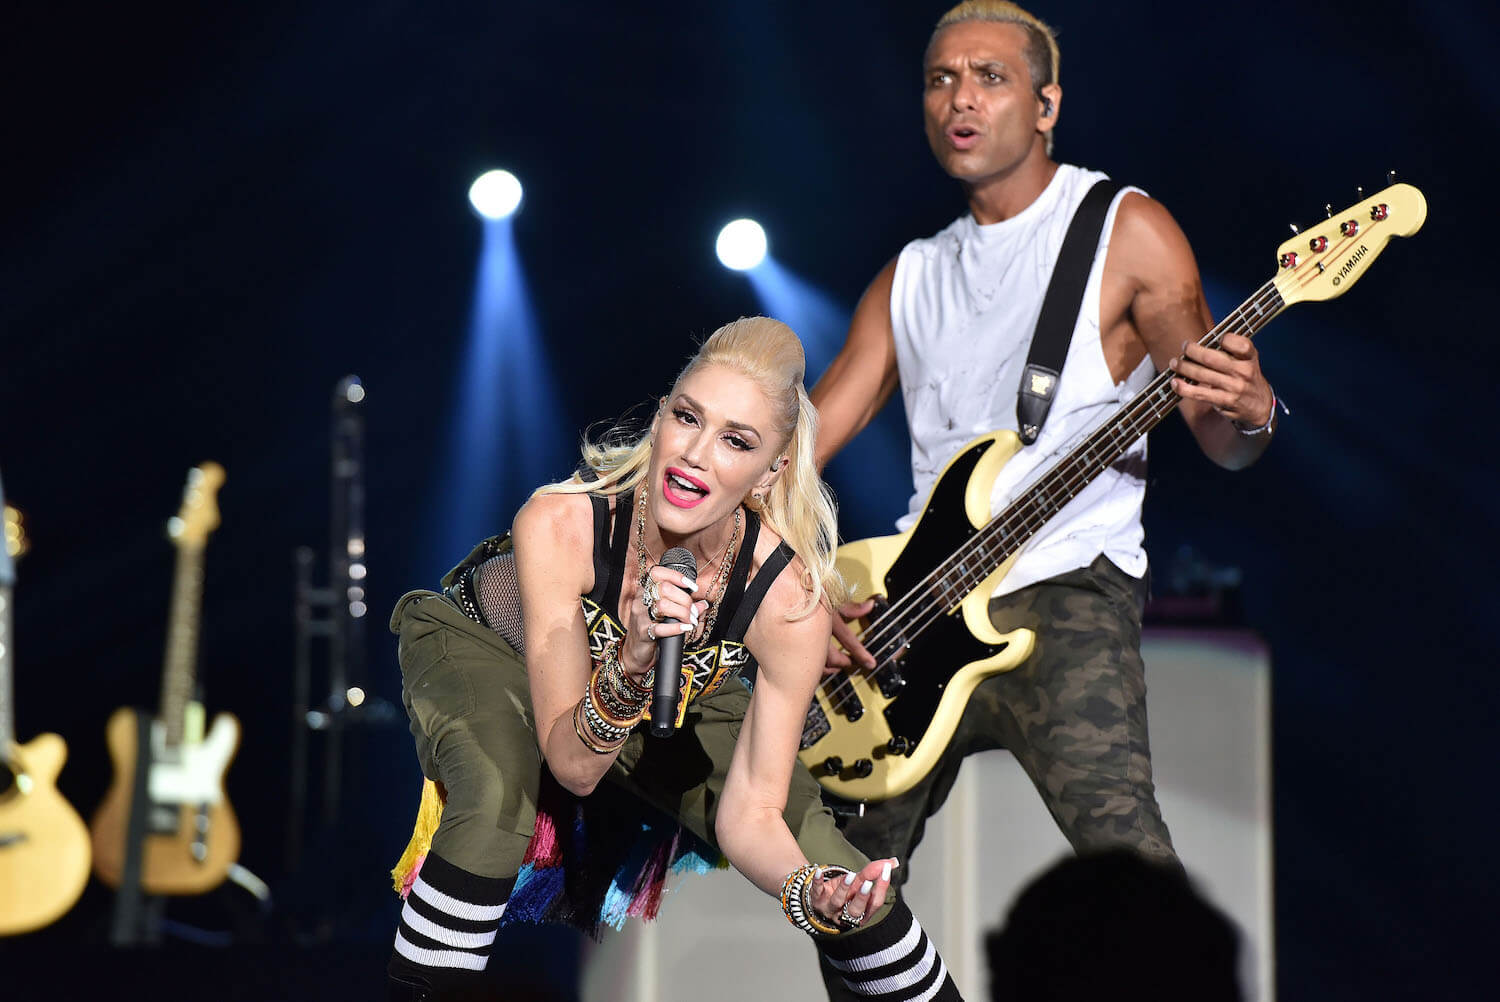 Gwen Stefani singing on stage in front of No Doubt bassist Tony Kanal in 2015